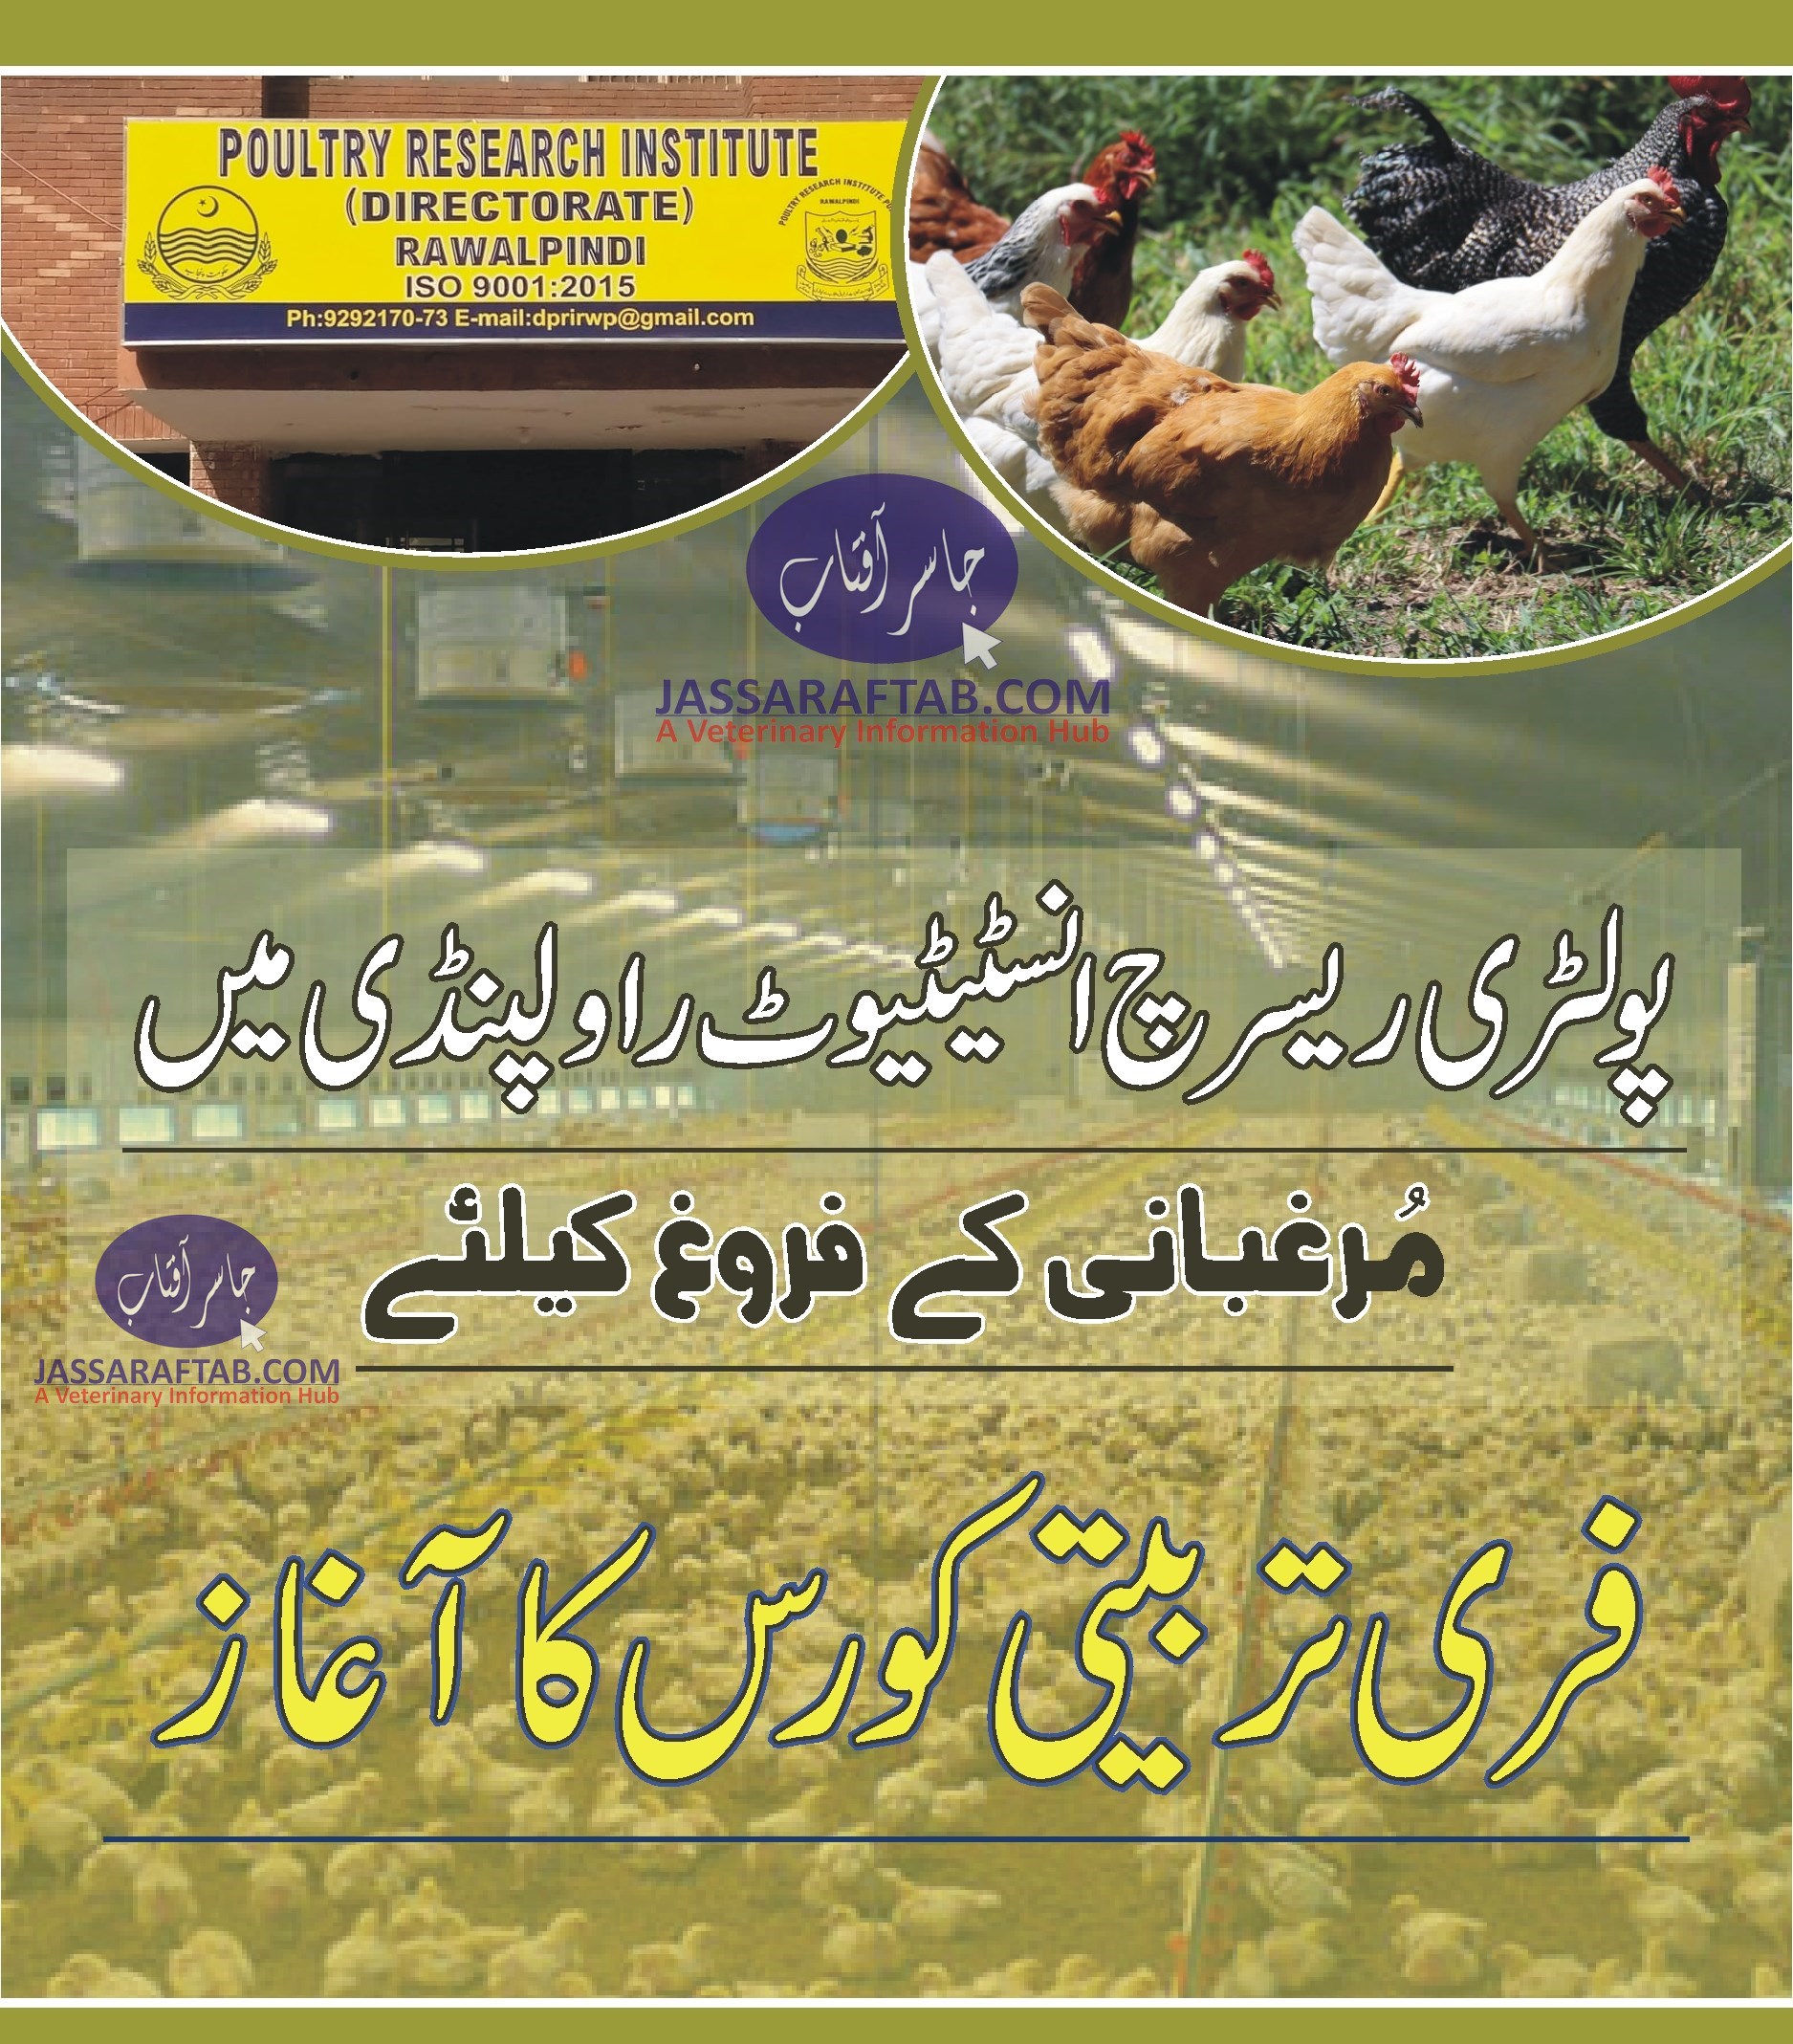 Poultry Farming Training. Free training on Poultry Farming